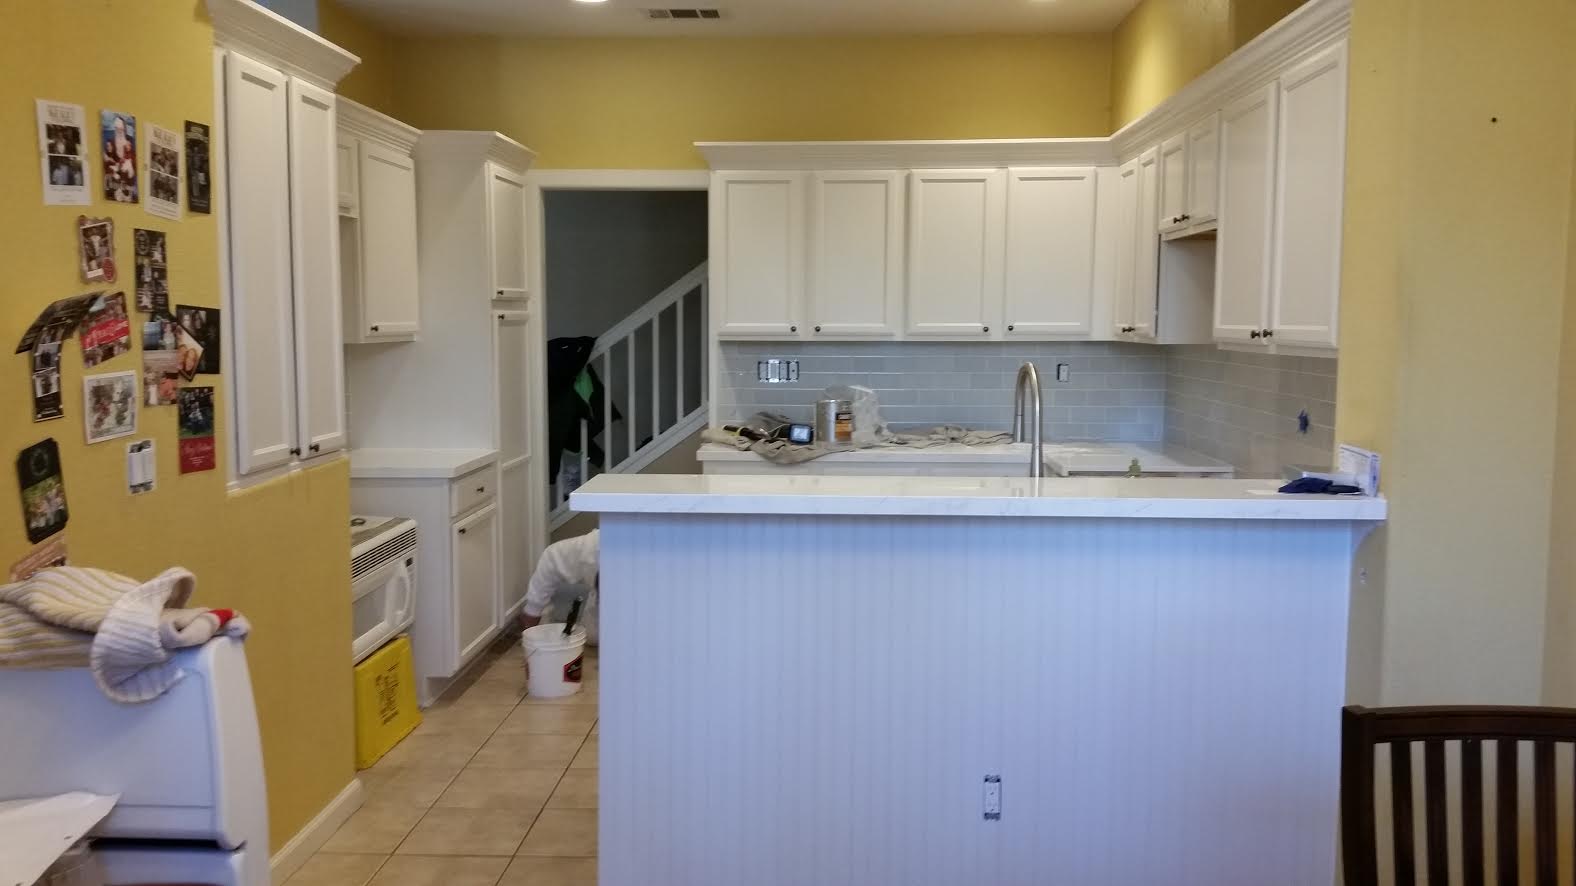 Kitchen Cabinets After